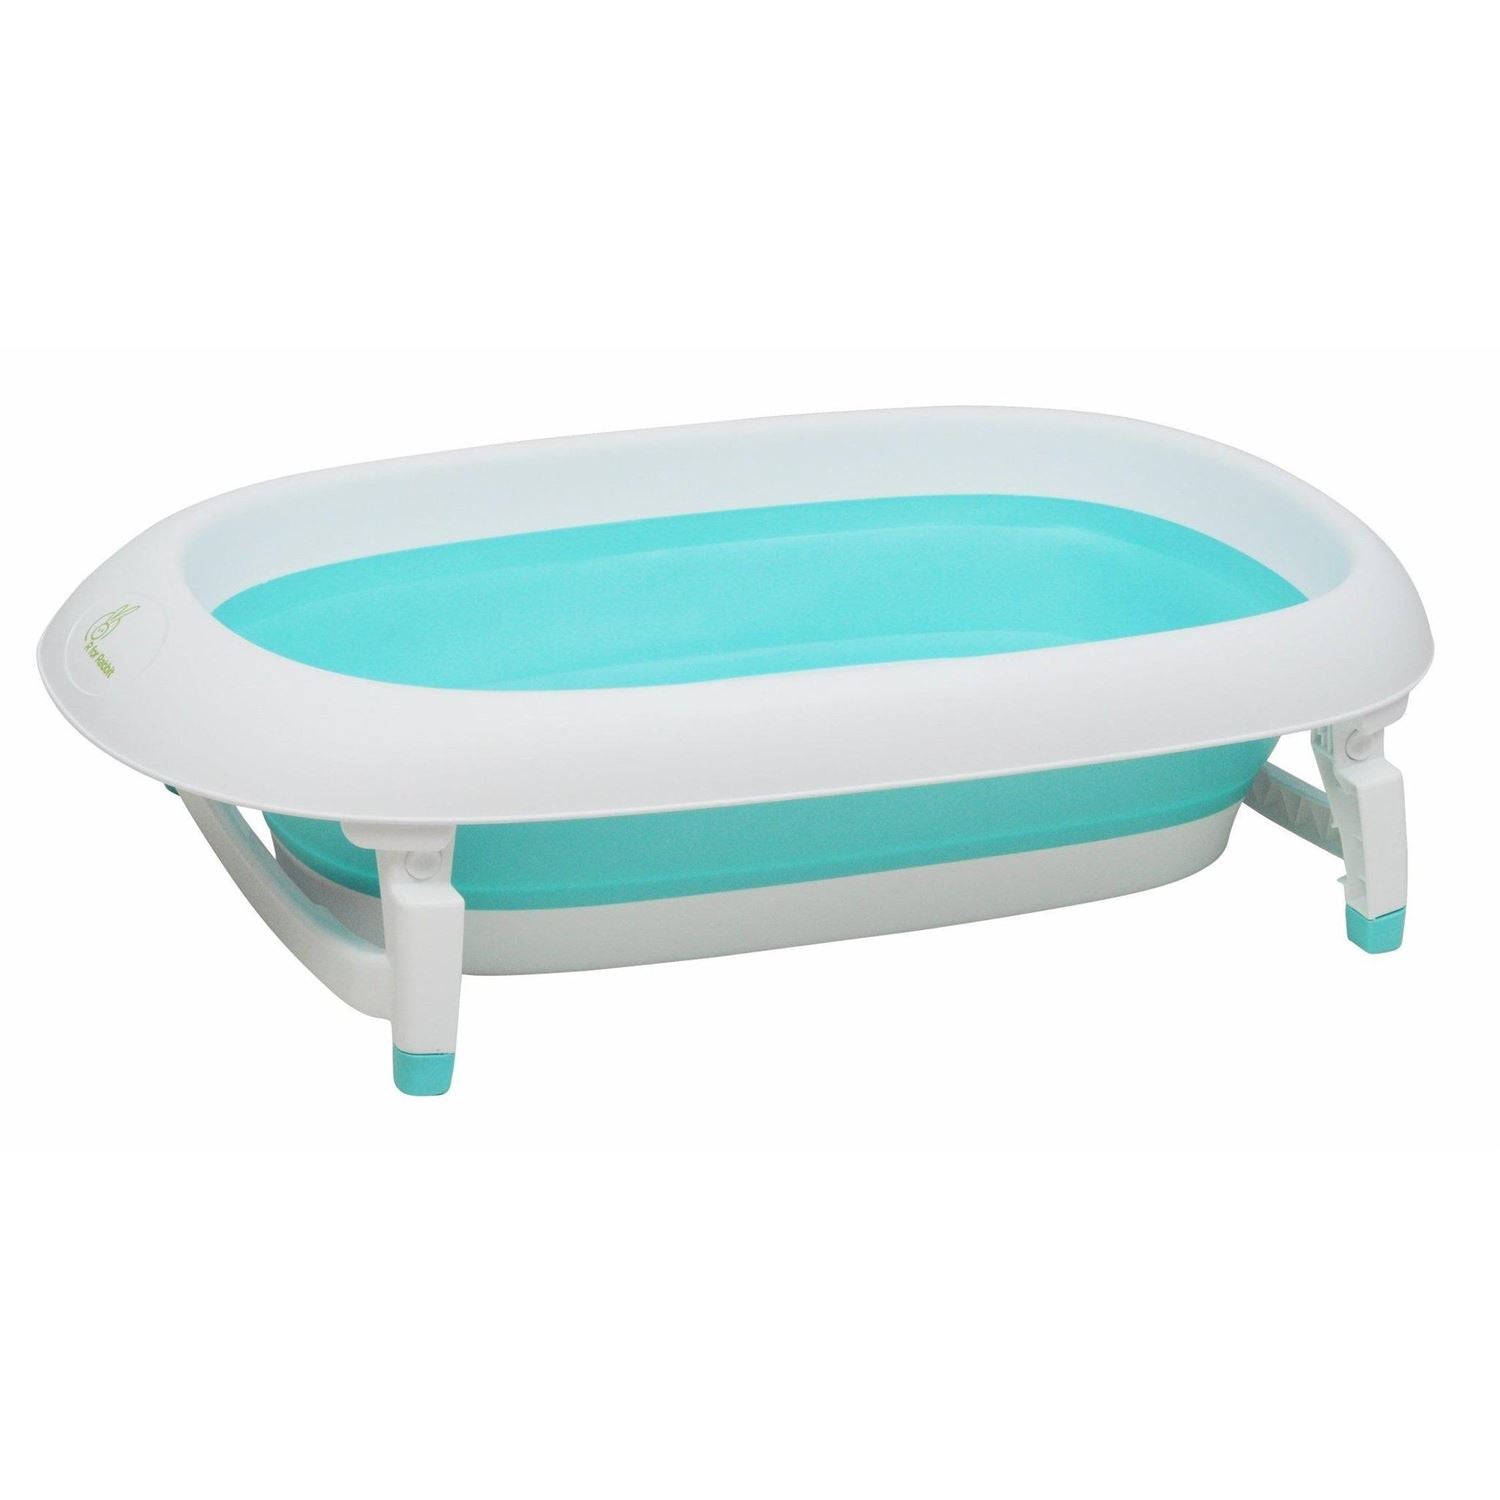 R FOR RABBIT Bubble Double Elite Baby Foldable Bath Tub, 0 to 3 years